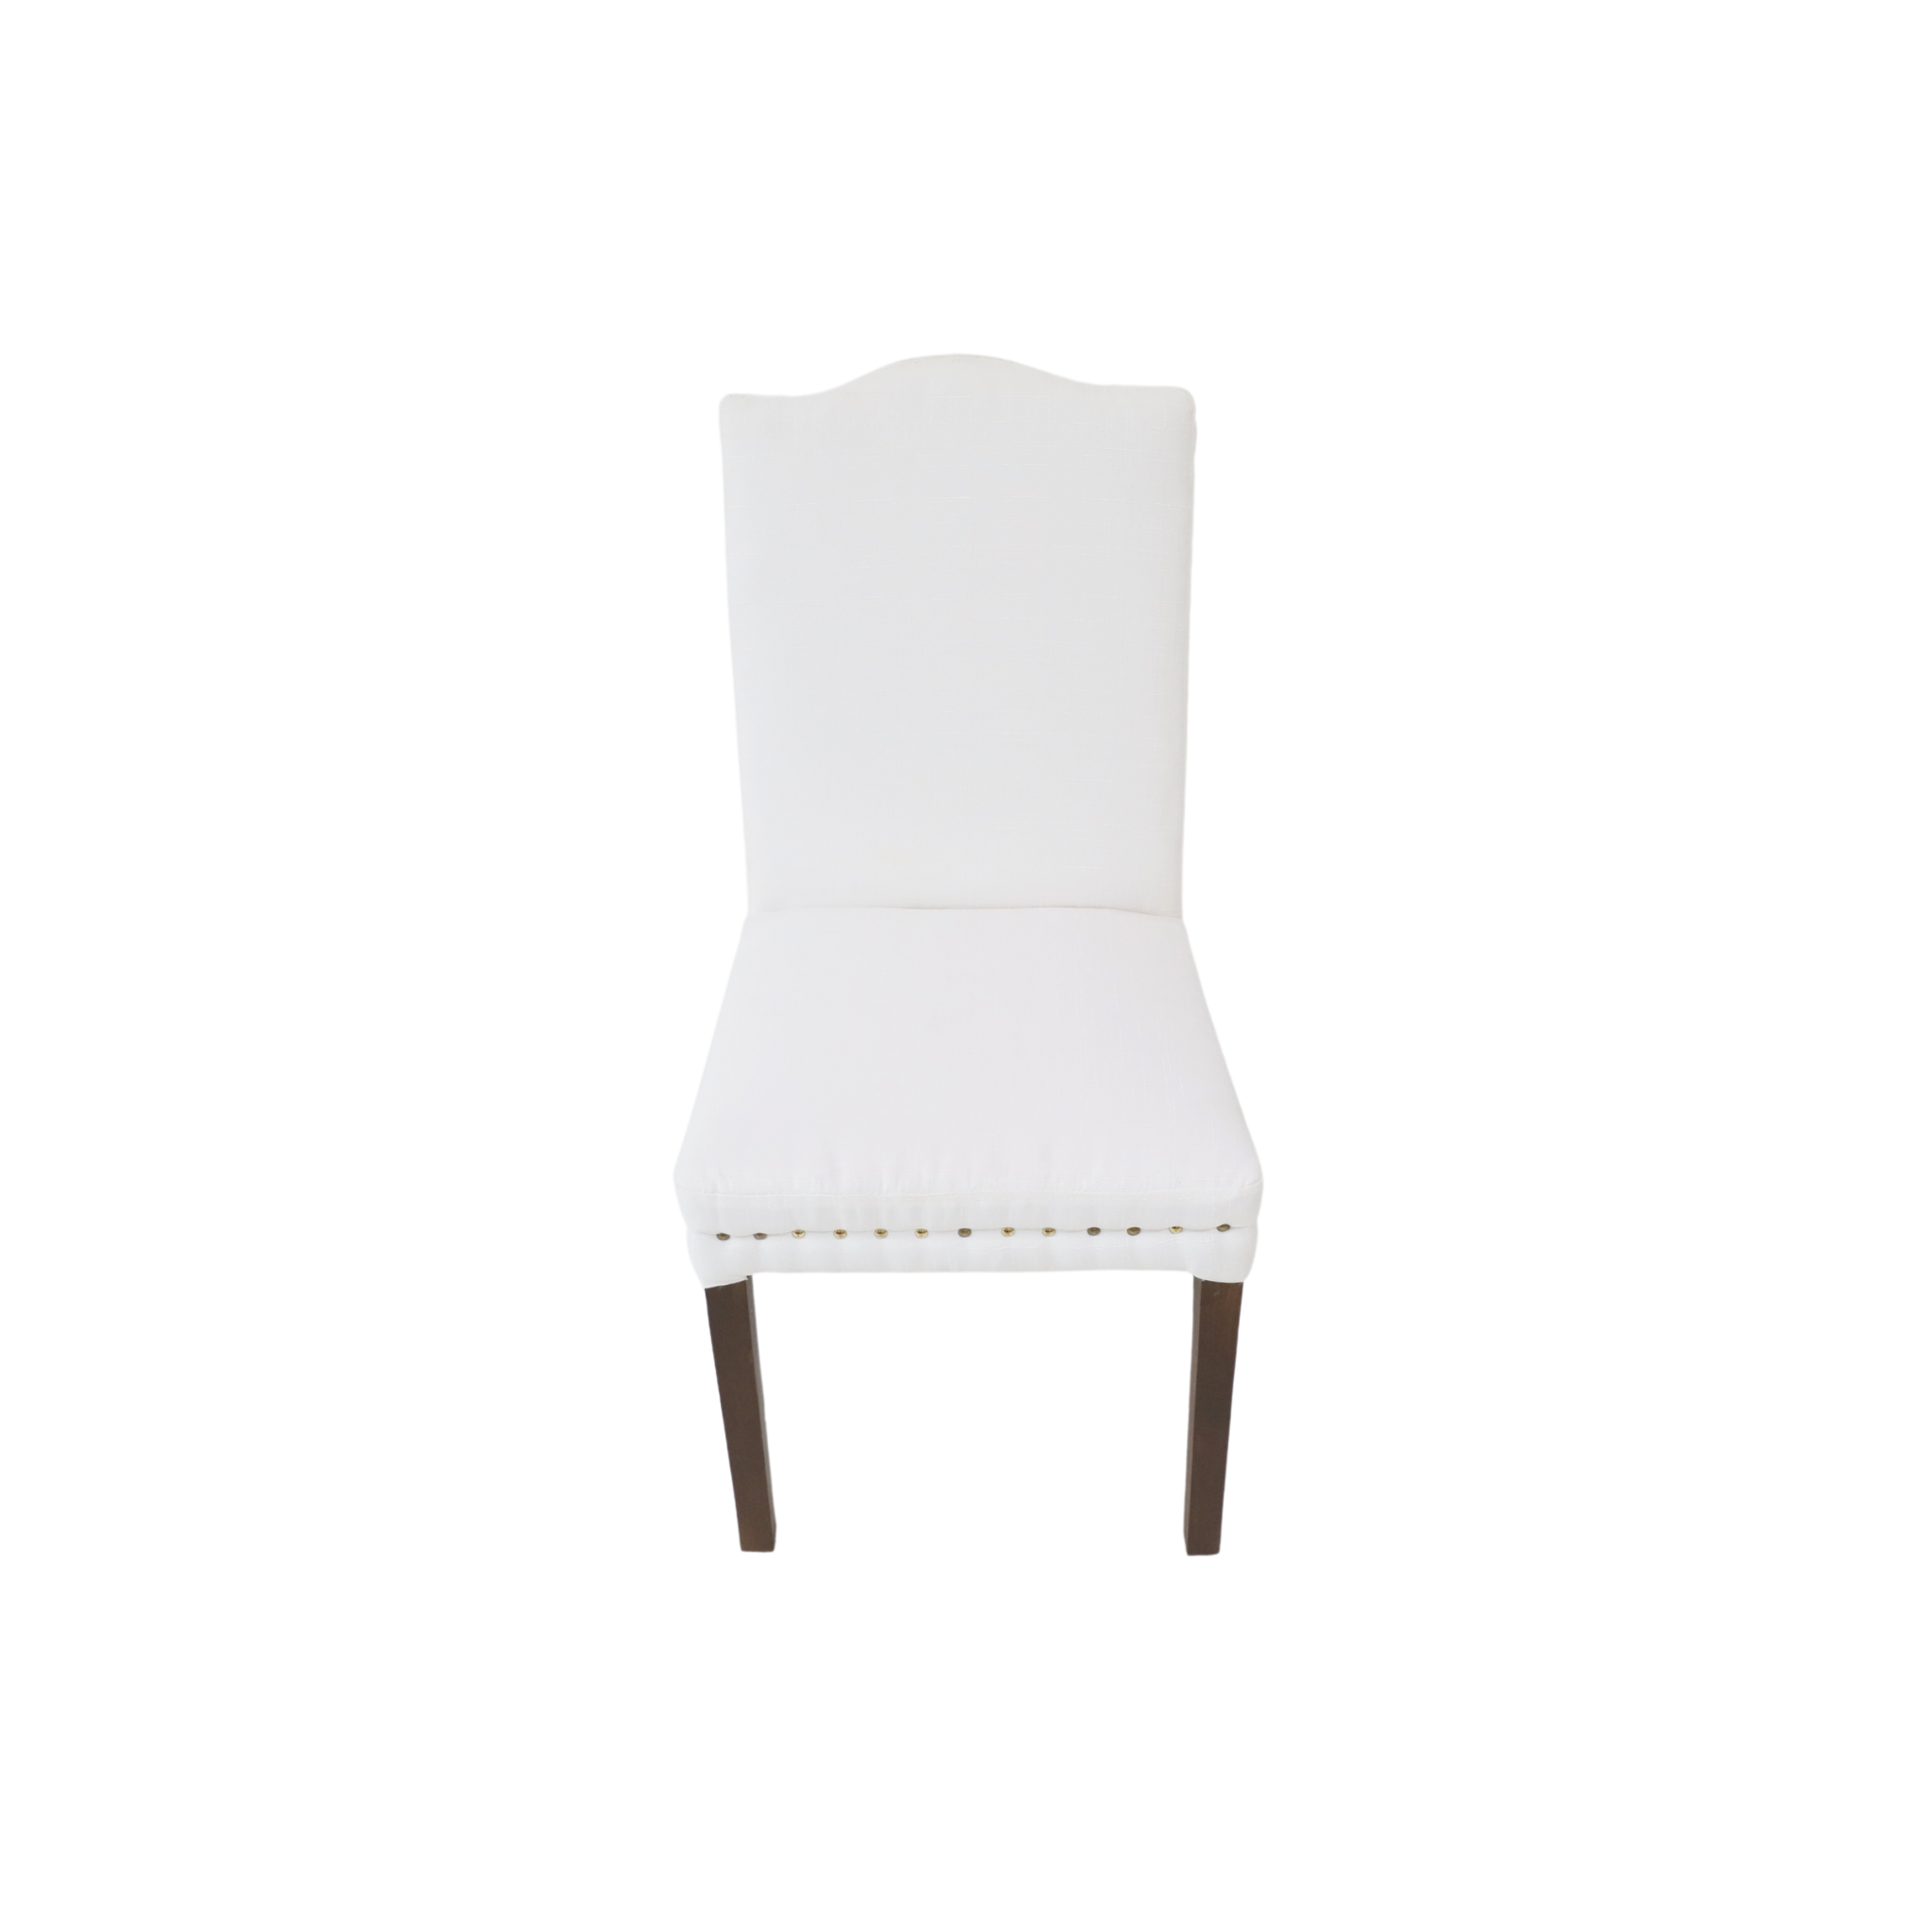 SEARI Wooden Dining Chair AF Home